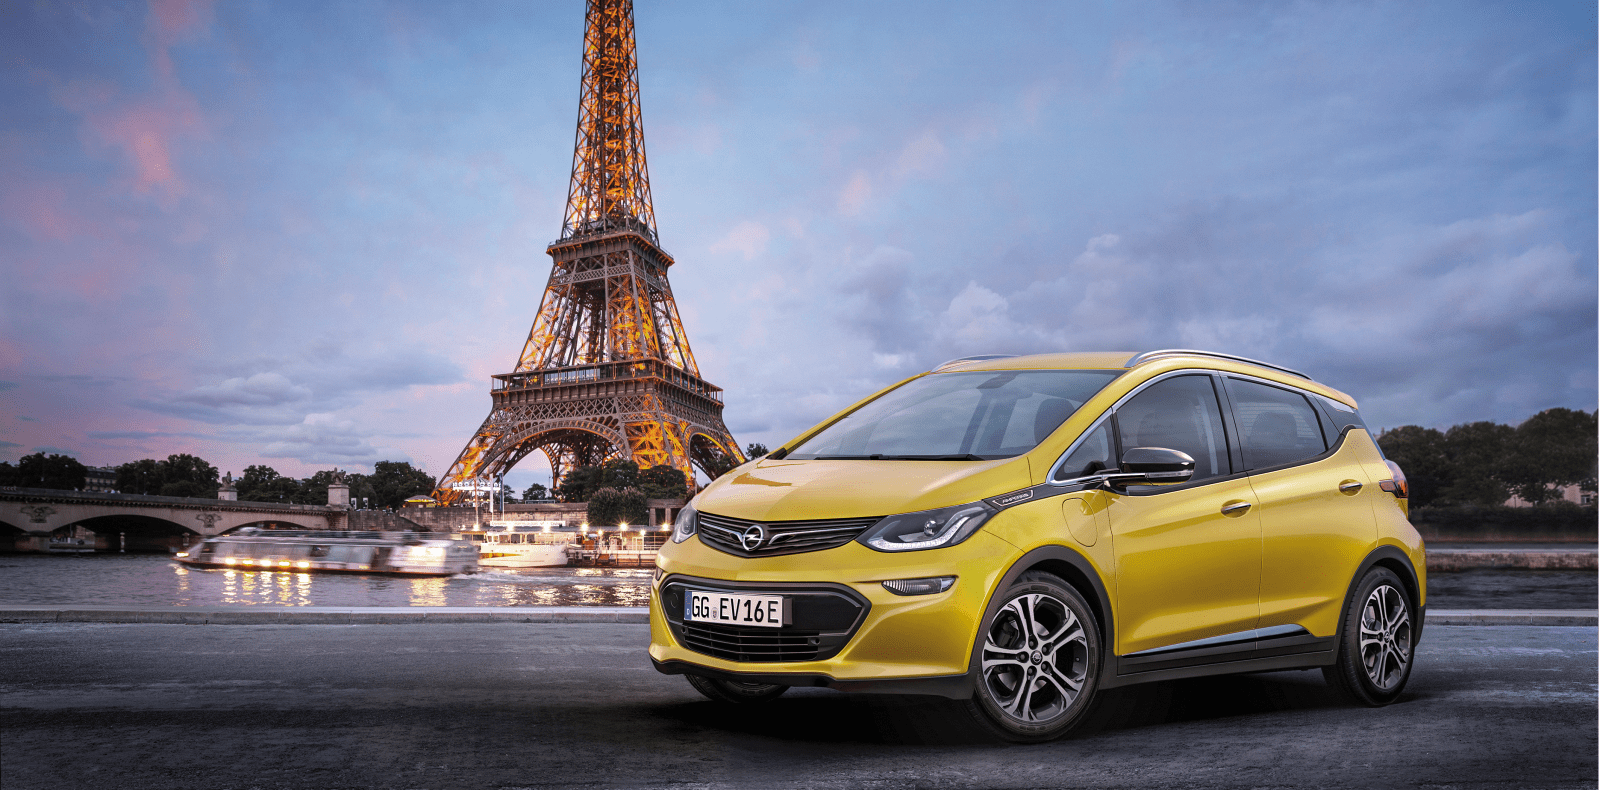 Paris to only allow electric cars as soon as 2030 ahead of France's